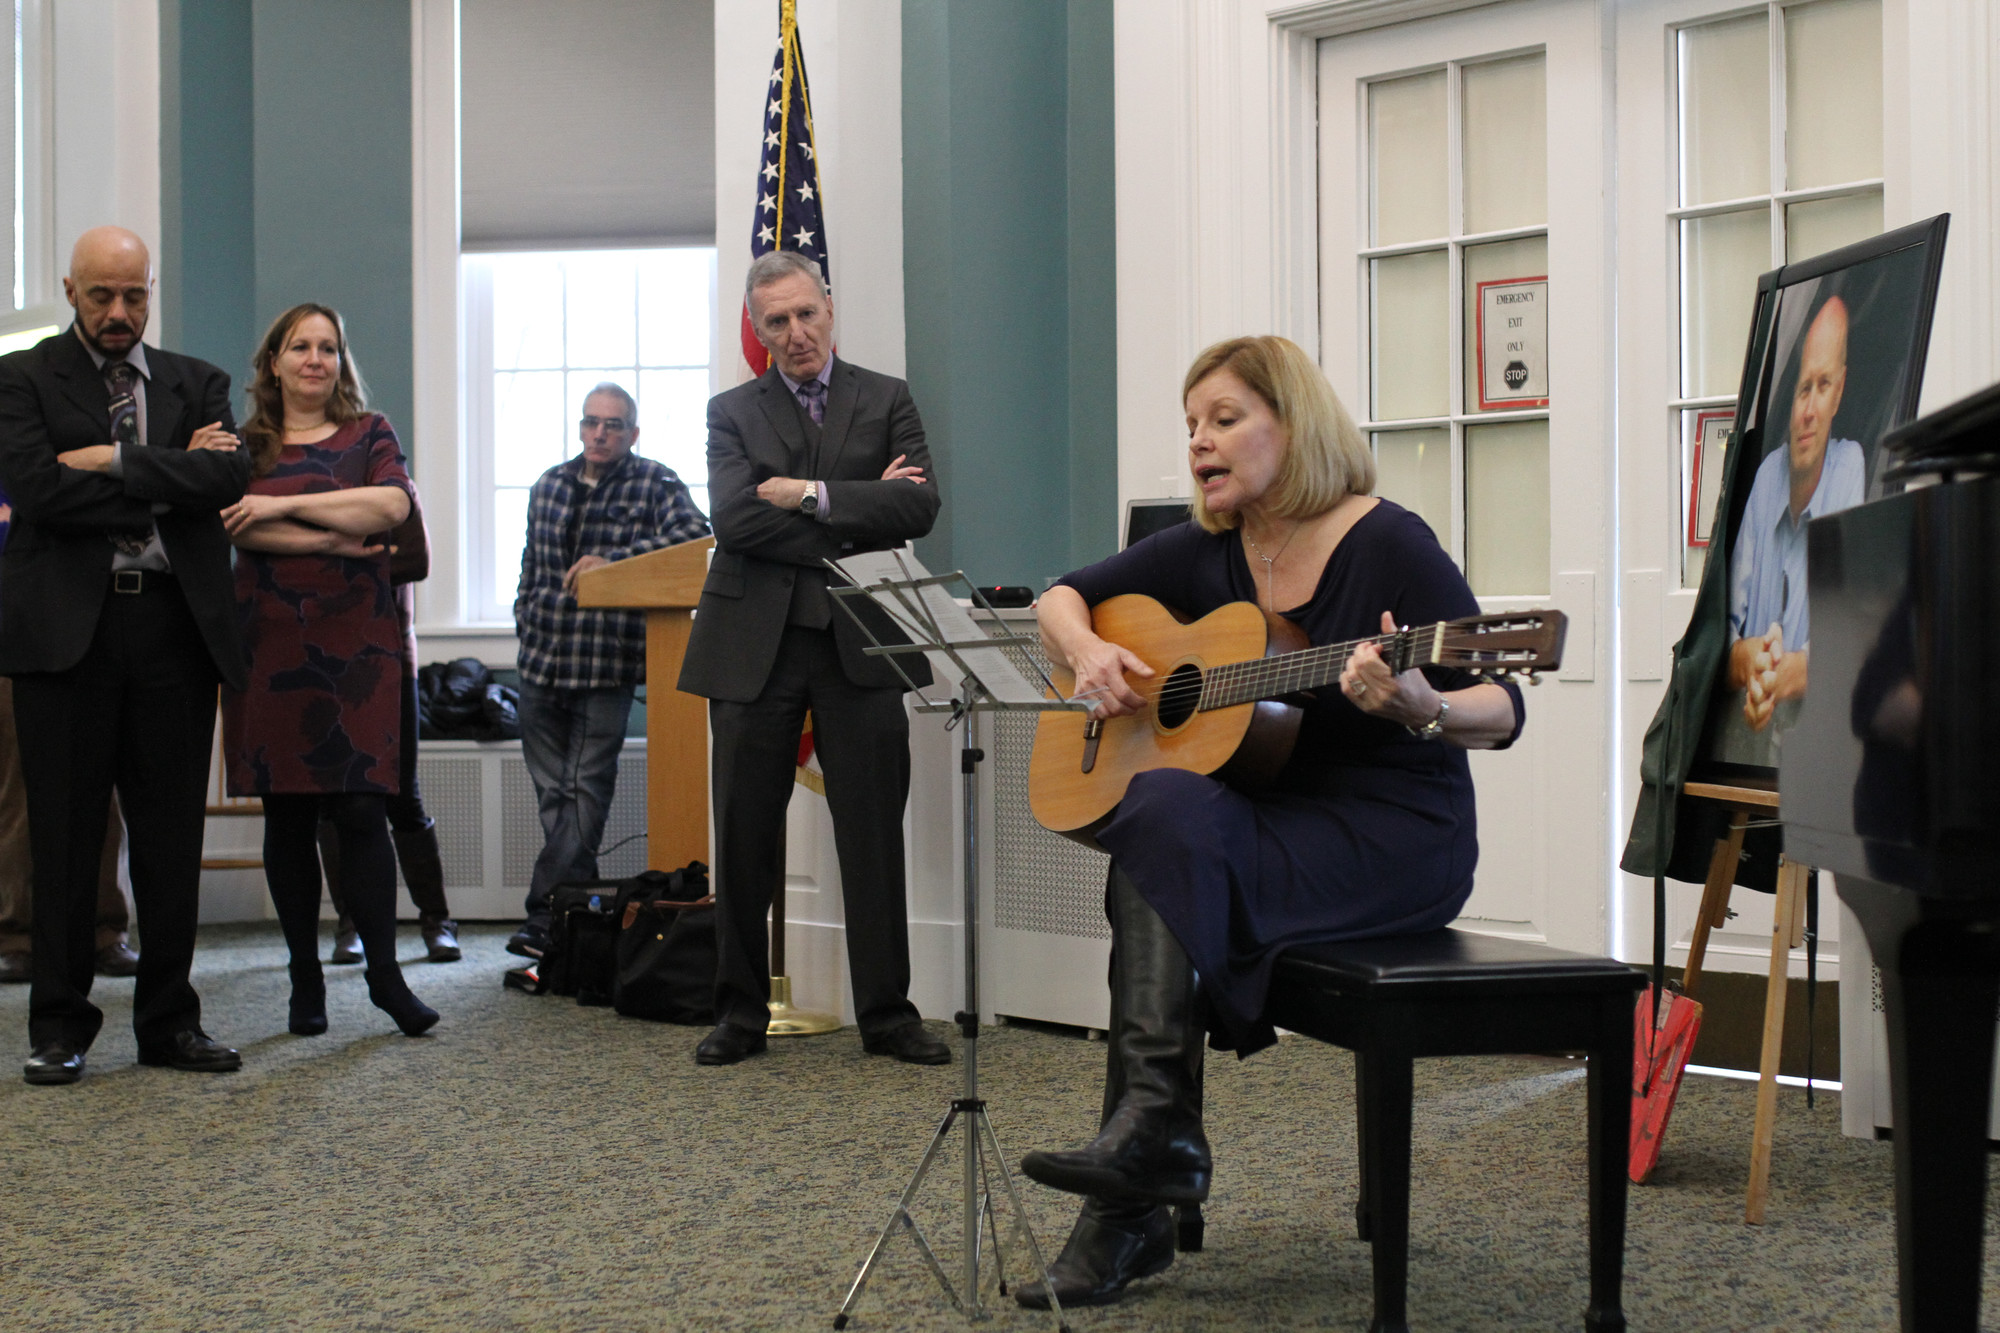 Kerry Koehler, a retired East Rockaway High School teacher and a friend of Bishop's for over 30 years, performed an original song in memory of her late friend.